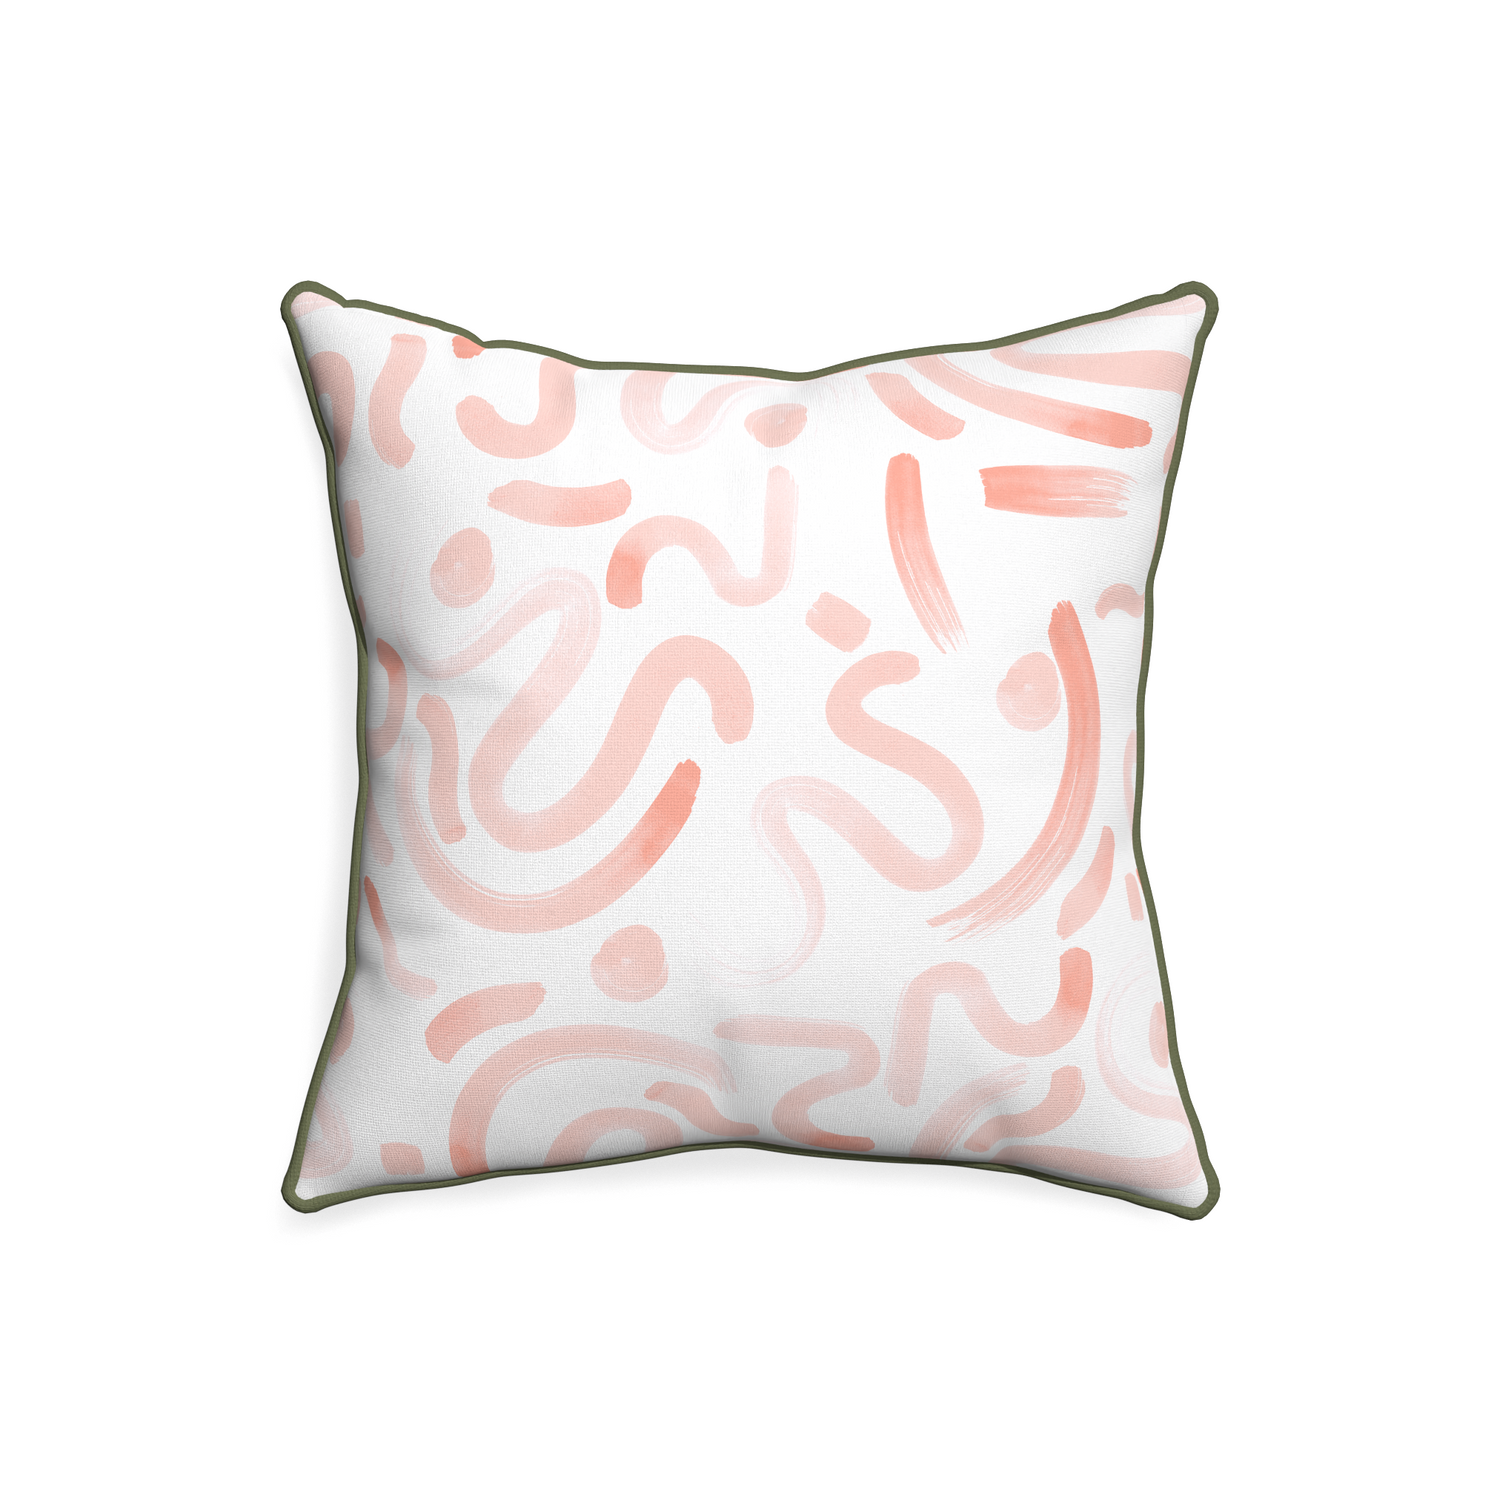 20-square hockney pink custom pink graphicpillow with f piping on white background